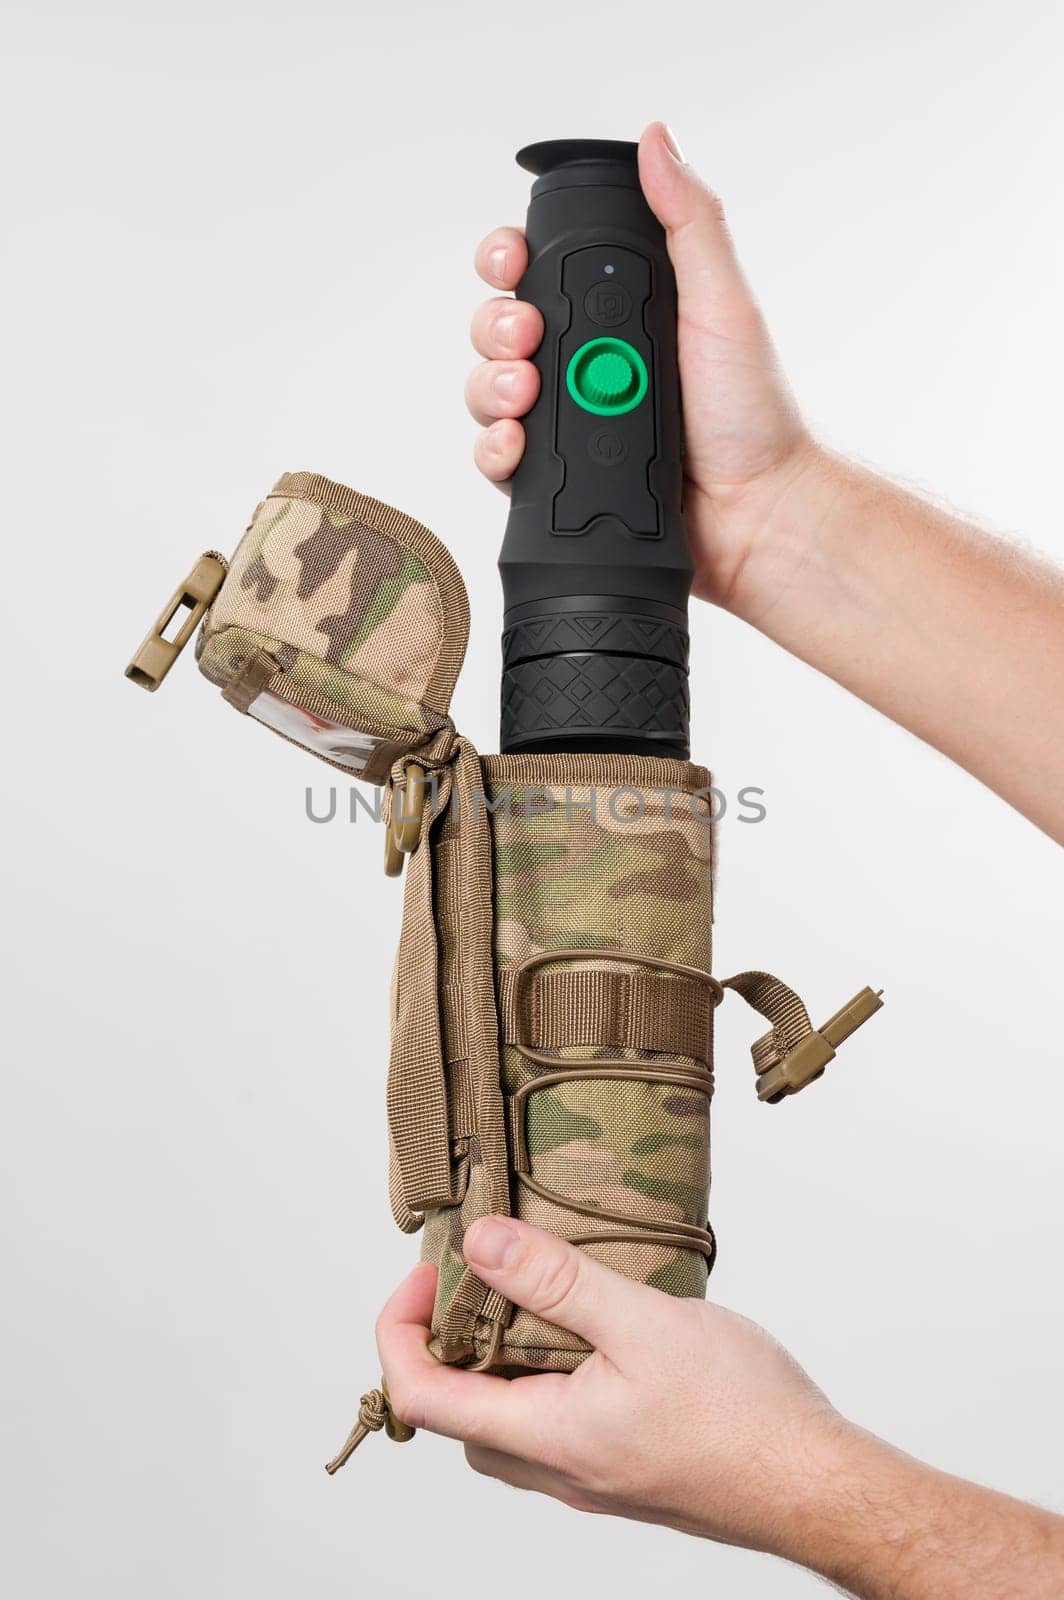 Military monocular in a case for storage and carrying, a man demonstrates a monocular in a protective case to a bag in pixels.